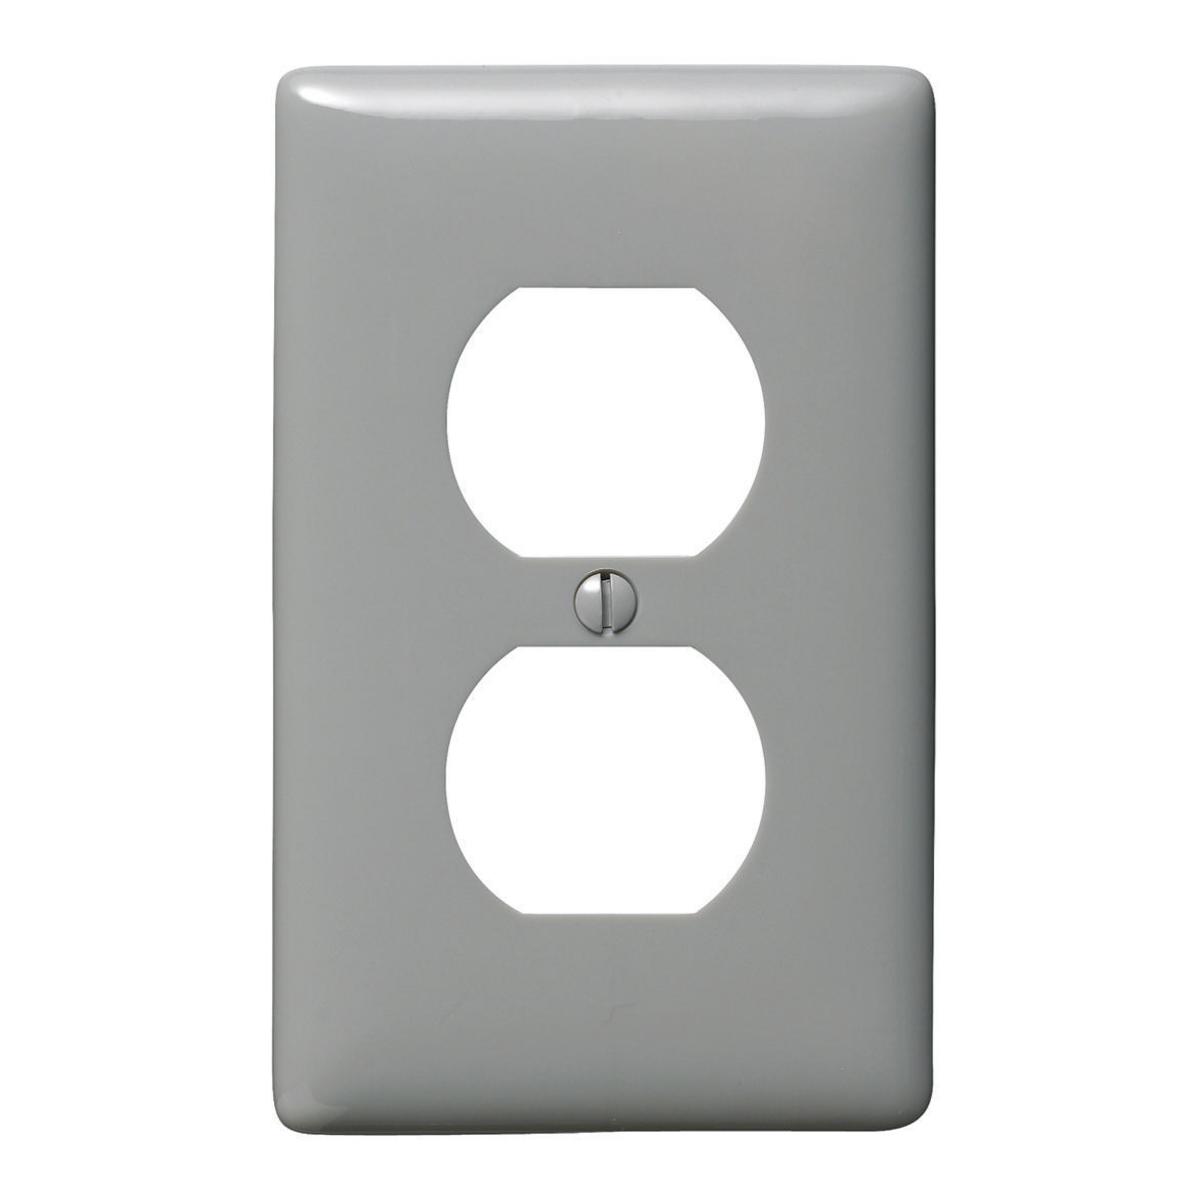 Hubbell NPJ8GY Wallplates and Box Covers, Wallplate, Nylon, Mid-Sized, 1-Gang, 1) Duplex, Gray  ; Reinforcement ribs for extra strength ; Captive screw feature holds mounting screw in place ; High-impact, self-extinguishing nylon material ; Standard Size is 1/8" larger 